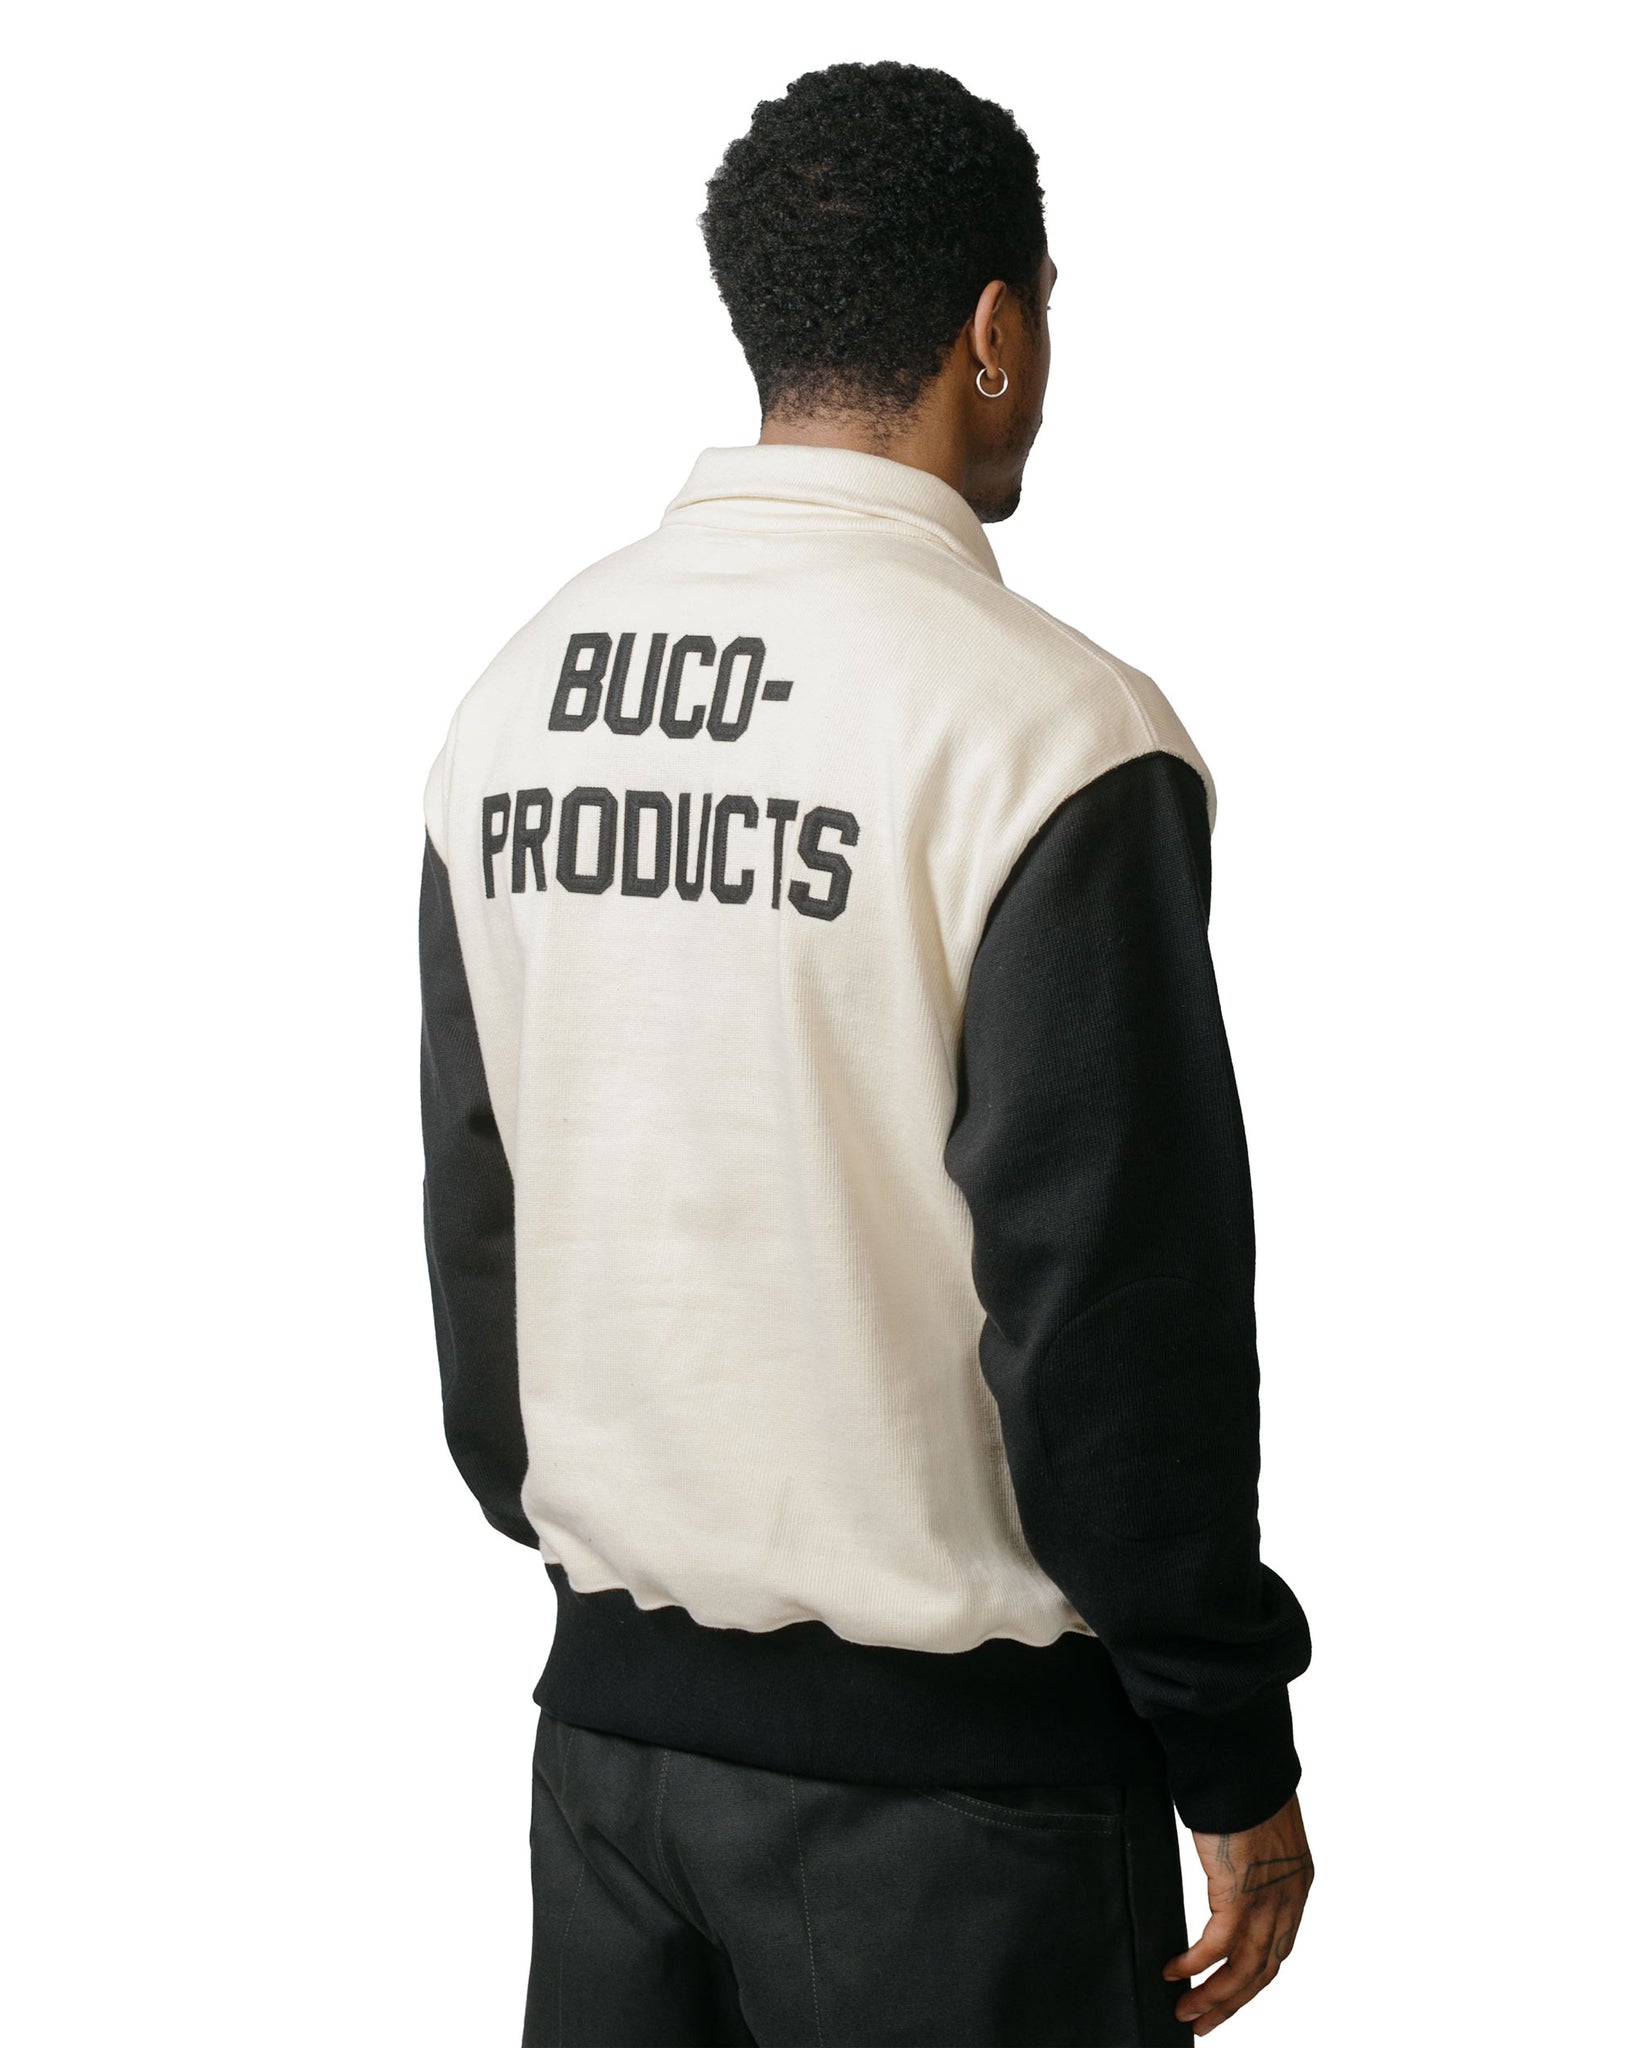 The Real McCoy's BC23104 Buco Half-Zip Motorcycle Jersey / Buco-Product White/Black model back